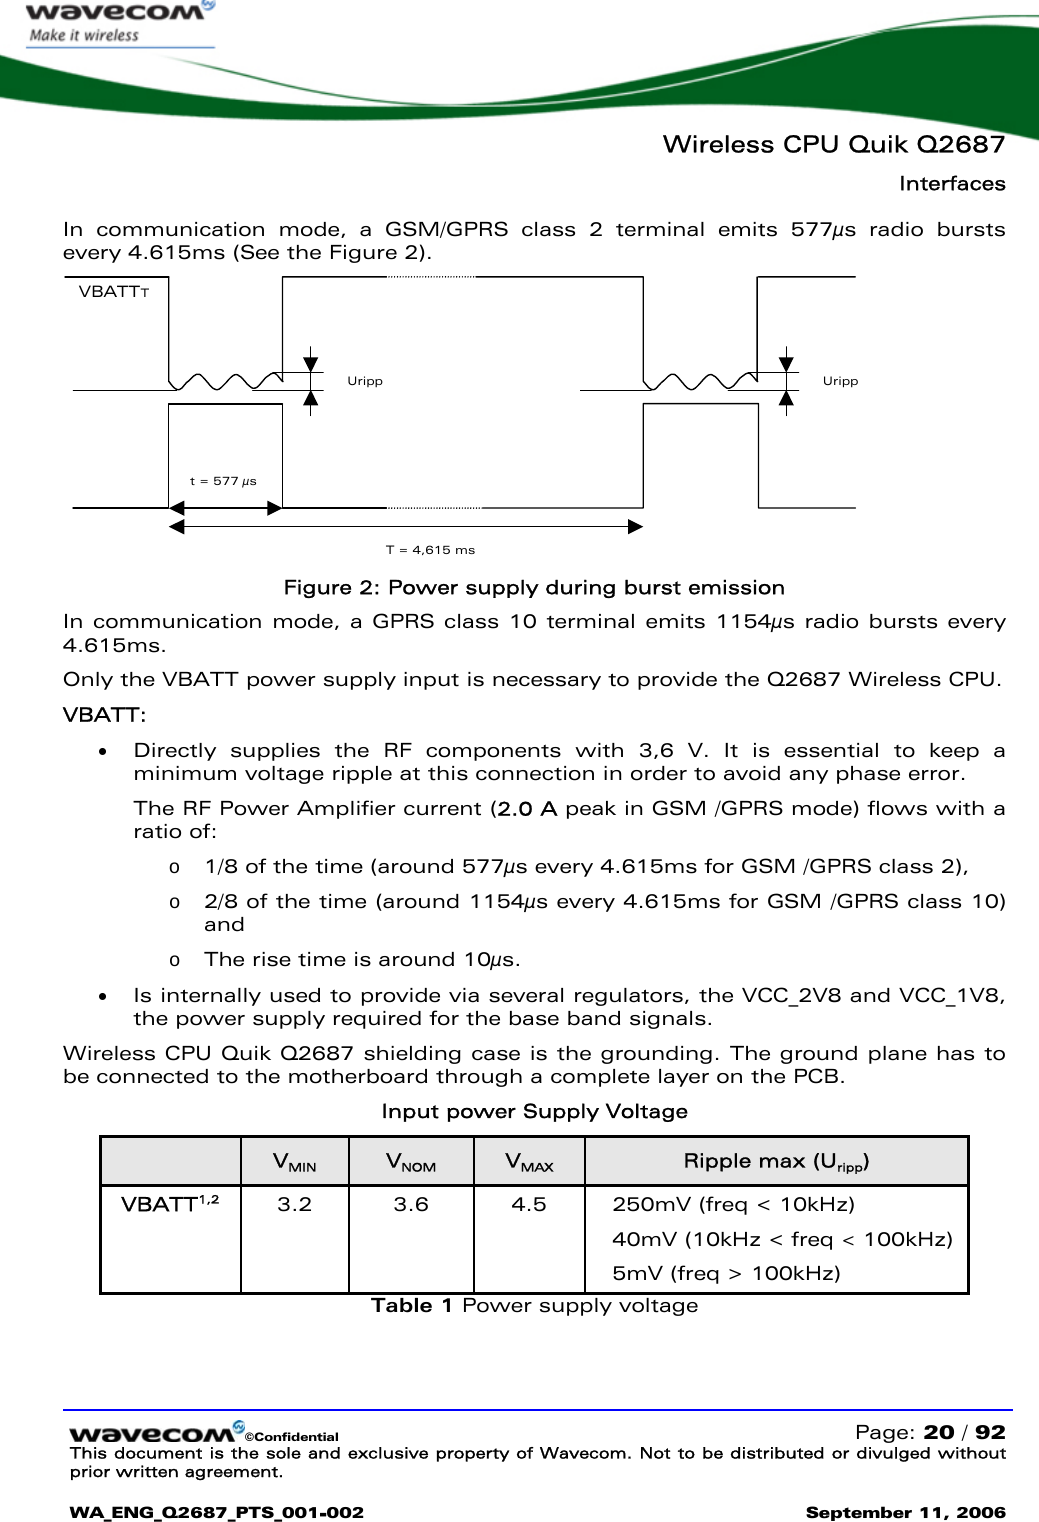   Wireless CPU Quik Q2687 Interfaces   ©Confidential   Page: 20 / 92 This document is the sole and exclusive property of Wavecom. Not to be distributed or divulged without prior written agreement.  WA_ENG_Q2687_PTS_001-002 September 11, 2006   In communication mode, a GSM/GPRS class 2 terminal emits 577µs radio bursts every 4.615ms (See the Figure 2).  Uripp VBATTT Uripp  T = 4,615 ms t = 577 µs  Figure 2: Power supply during burst emission In communication mode, a GPRS class 10 terminal emits 1154µs radio bursts every 4.615ms. Only the VBATT power supply input is necessary to provide the Q2687 Wireless CPU. VBATT:  • Directly supplies the RF components with 3,6 V. It is essential to keep a minimum voltage ripple at this connection in order to avoid any phase error.  The RF Power Amplifier current (2.0 A peak in GSM /GPRS mode) flows with a ratio of: o 1/8 of the time (around 577µs every 4.615ms for GSM /GPRS class 2),  o 2/8 of the time (around 1154µs every 4.615ms for GSM /GPRS class 10) and o The rise time is around 10µs.  • Is internally used to provide via several regulators, the VCC_2V8 and VCC_1V8, the power supply required for the base band signals.  Wireless CPU Quik Q2687 shielding case is the grounding. The ground plane has to be connected to the motherboard through a complete layer on the PCB. Input power Supply Voltage   VMIN  VNOM  VMAX Ripple max (Uripp) VBATT1,2 3.2  3.6  4.5  250mV (freq &lt; 10kHz) 40mV (10kHz &lt; freq &lt; 100kHz) 5mV (freq &gt; 100kHz) Table 1 Power supply voltage 